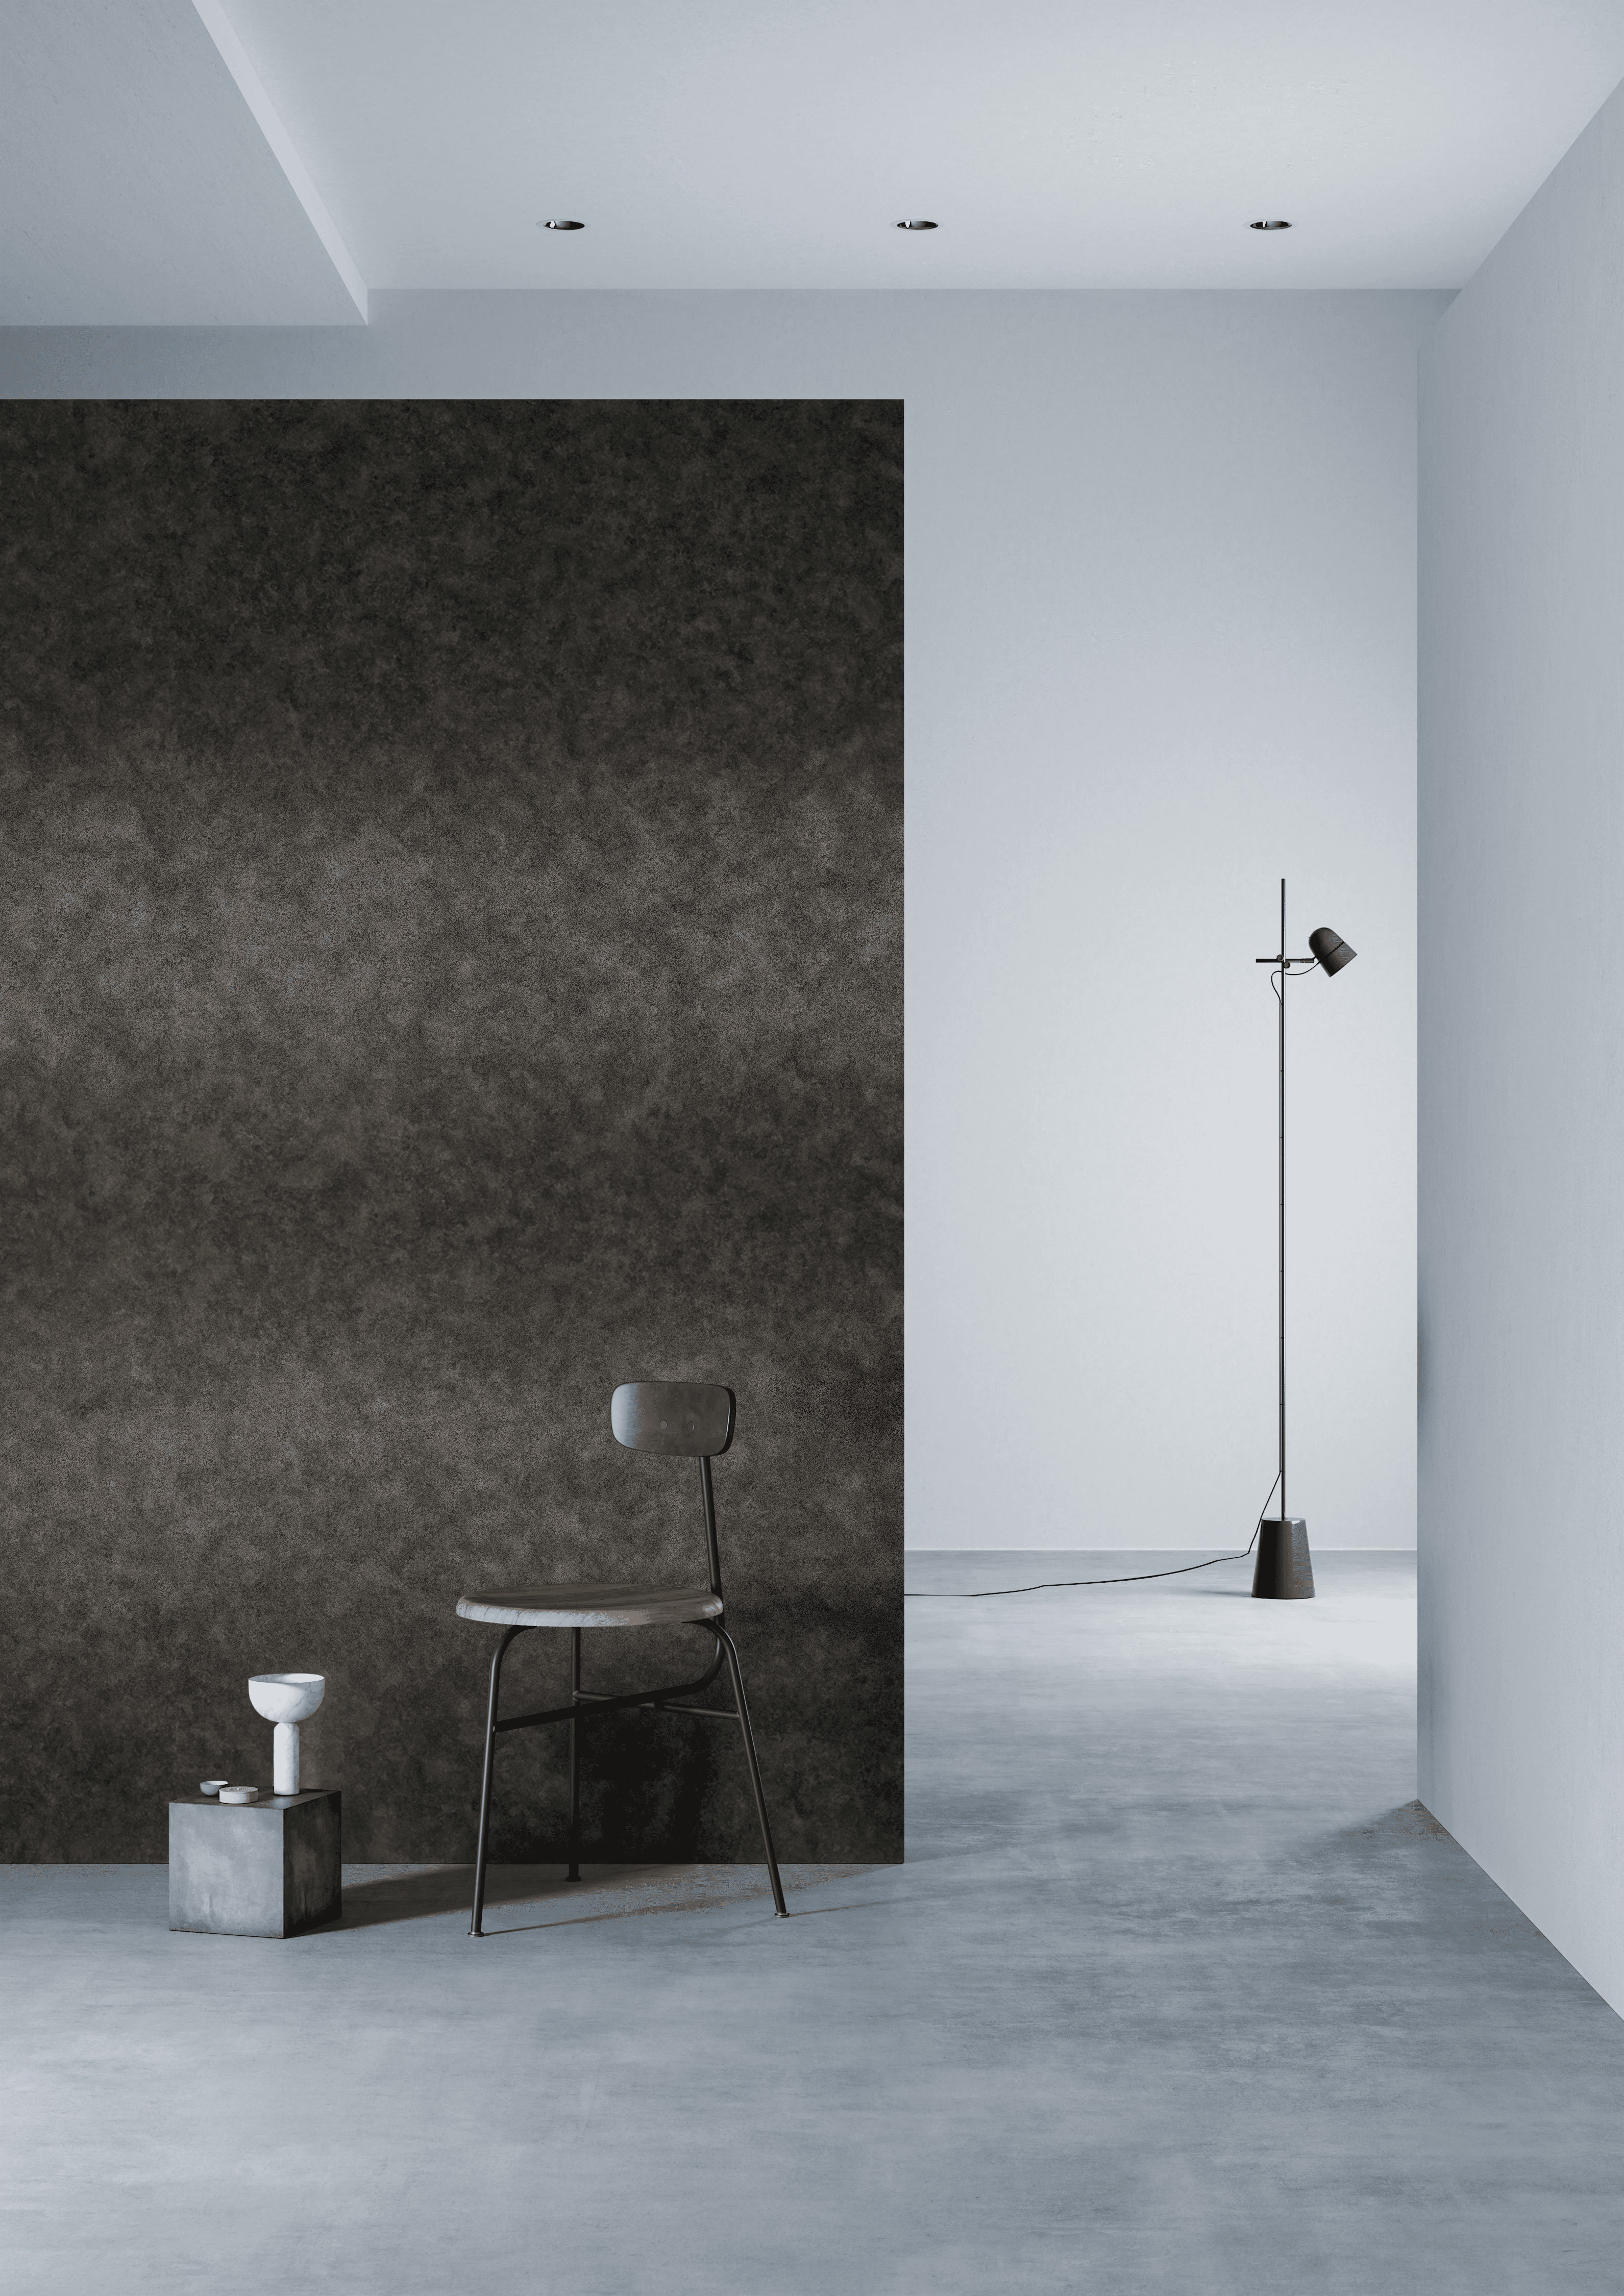 3M DI-NOC Metallic Architectural Finish ME-2174 Oxidized Silver installation render on a wall